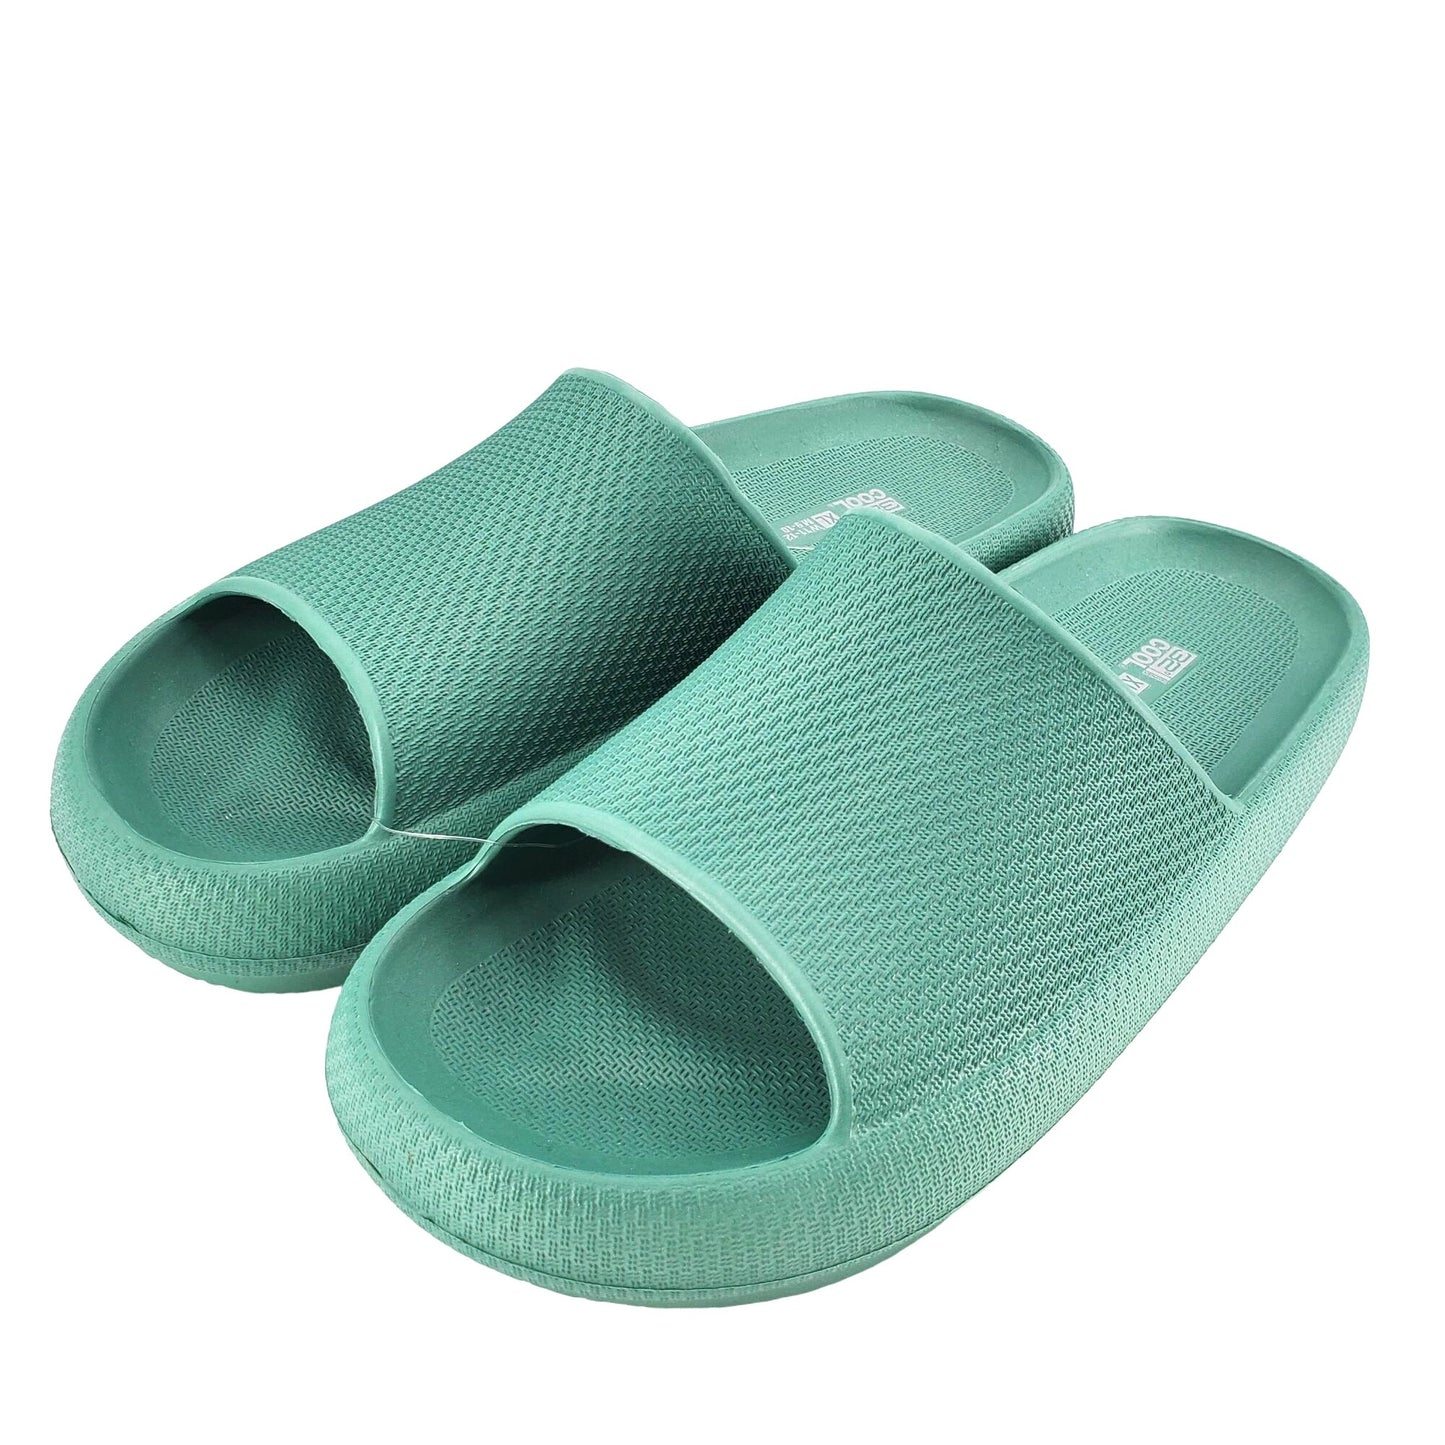 32 DEGREES Cushion Slides 32 Degrees Cool Cushion Slide-on Sandals Outdoor Waterproof shoes College Shower